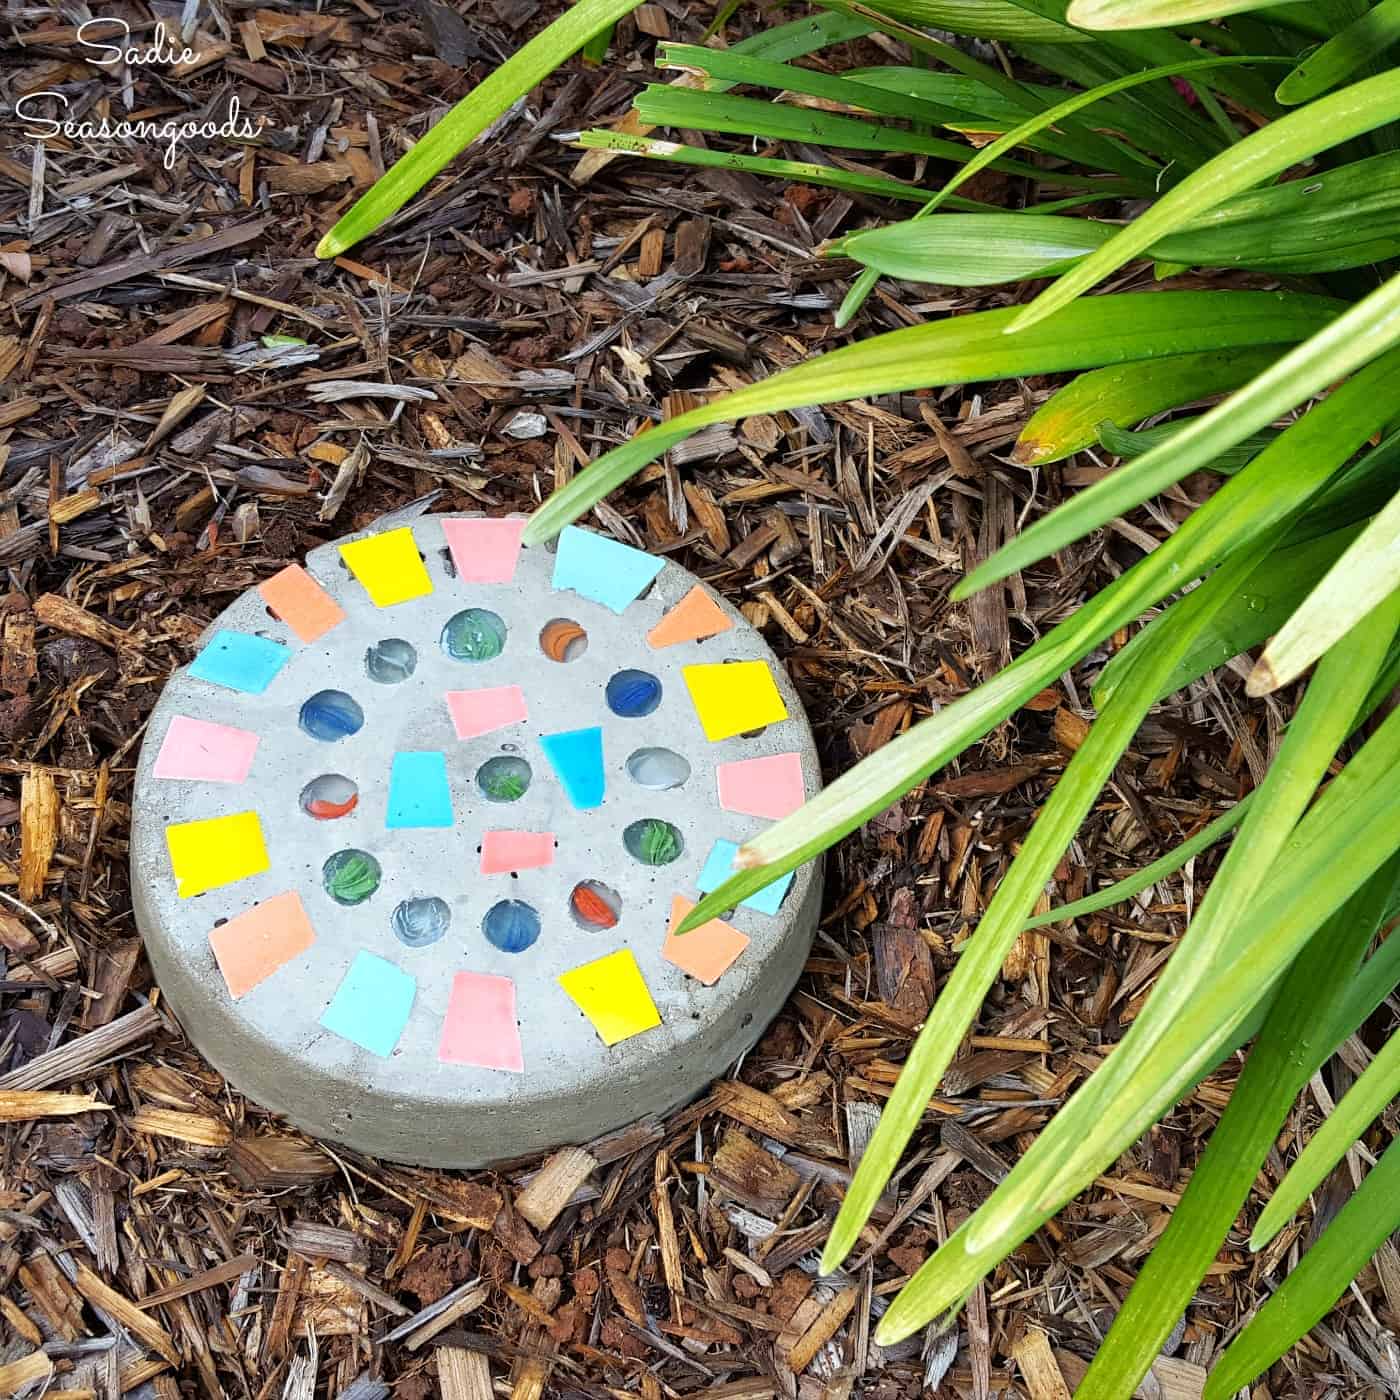 Cake pan stepping stone with a secret keyholder